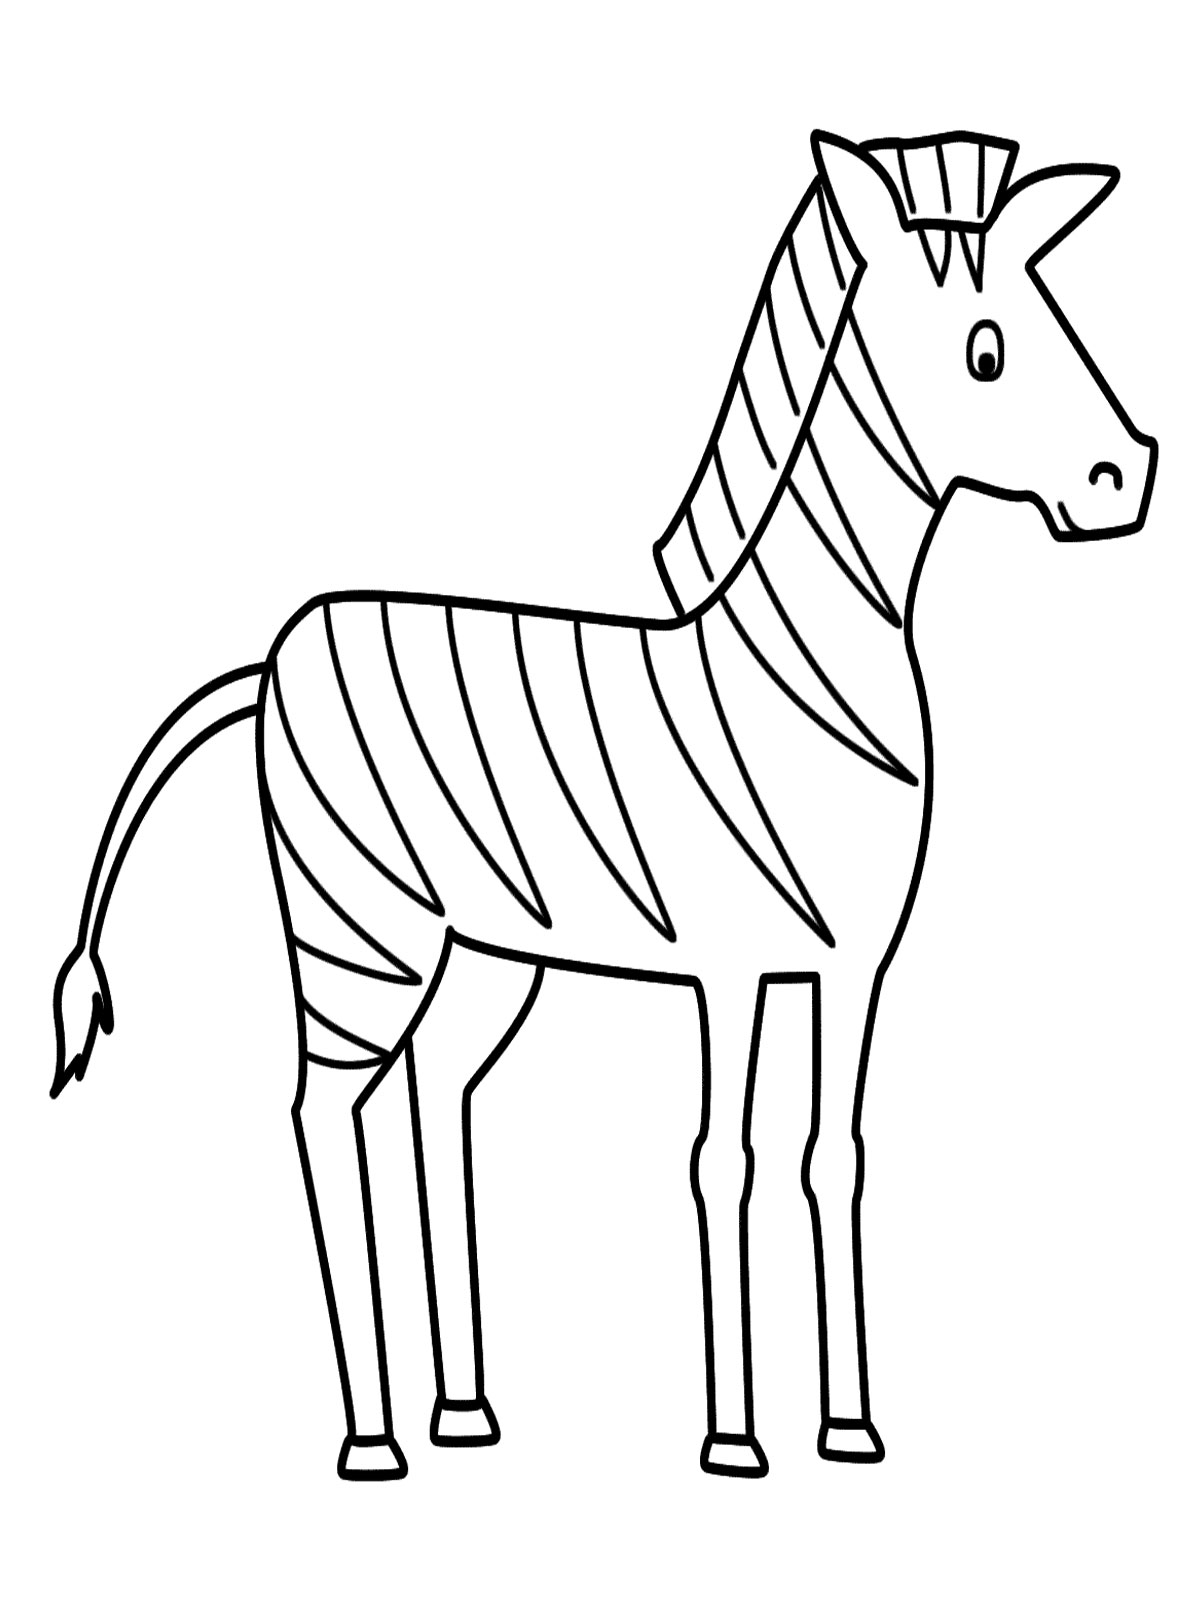 Zebra Drawing For Kids HD Wallpapers on picsfair.com